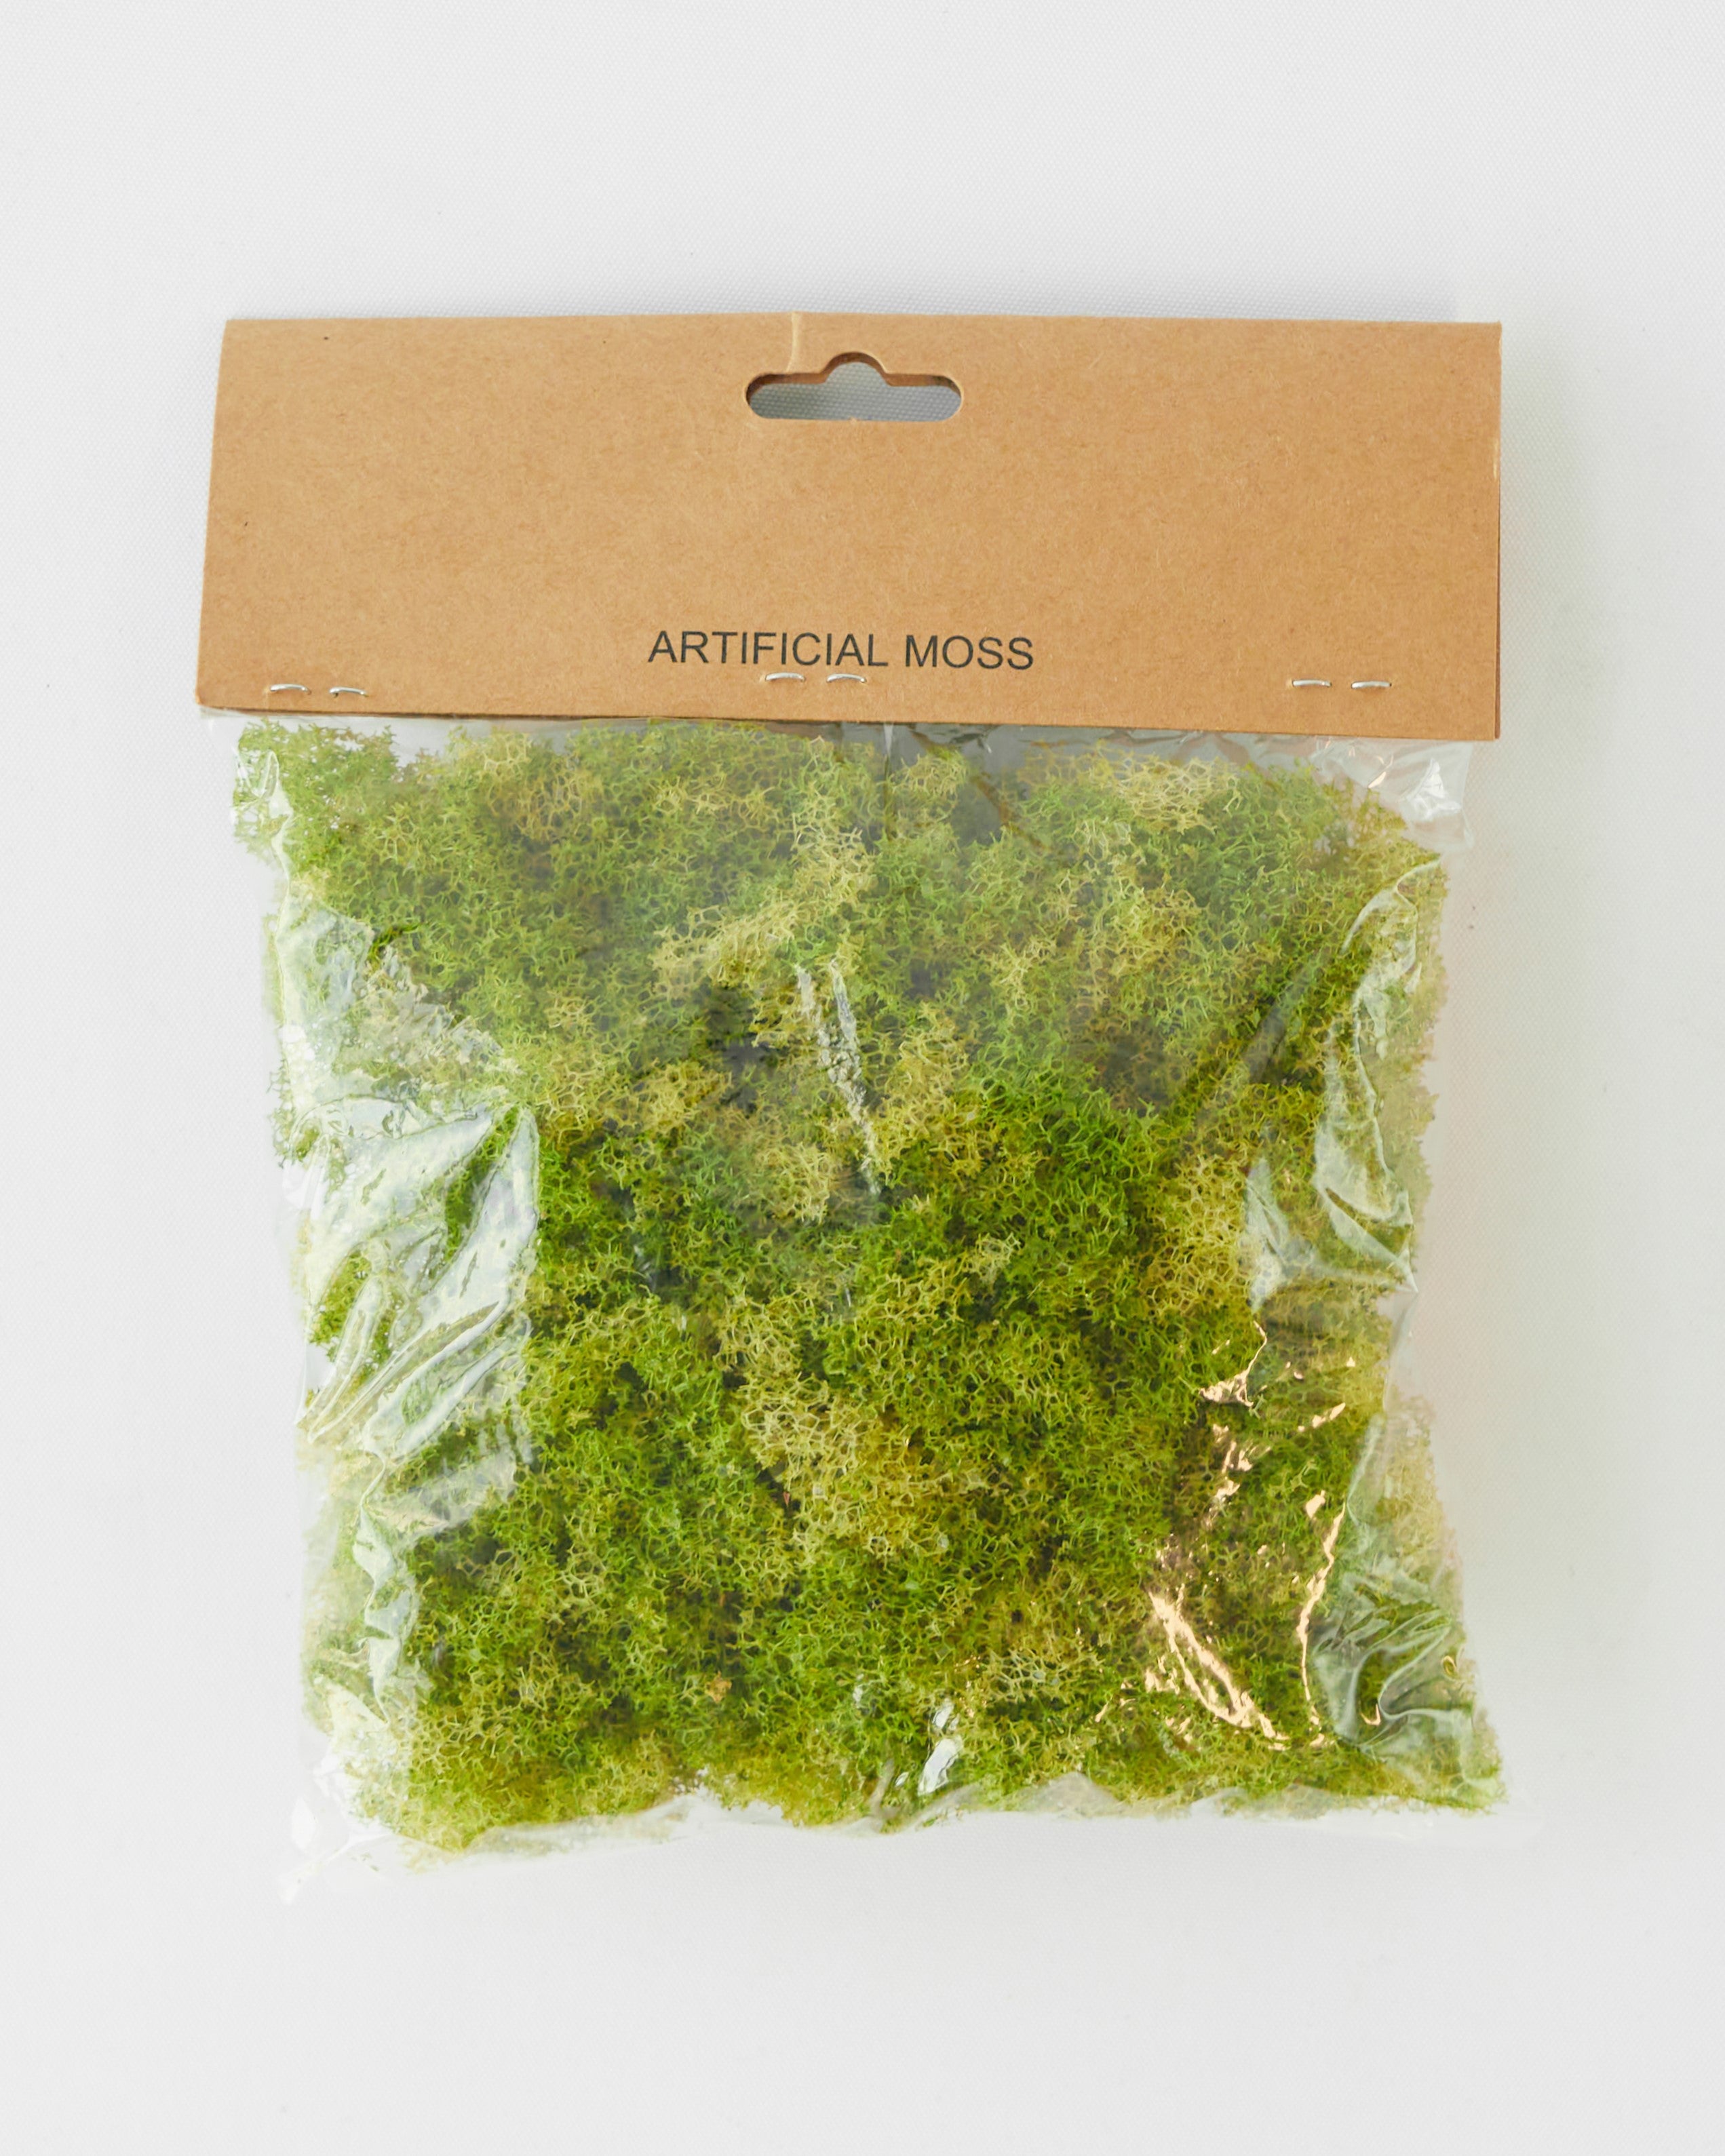 ARTIFICIAL MOSS 20CM - 5637 (Box of 6) – Reliance Trading Corporation